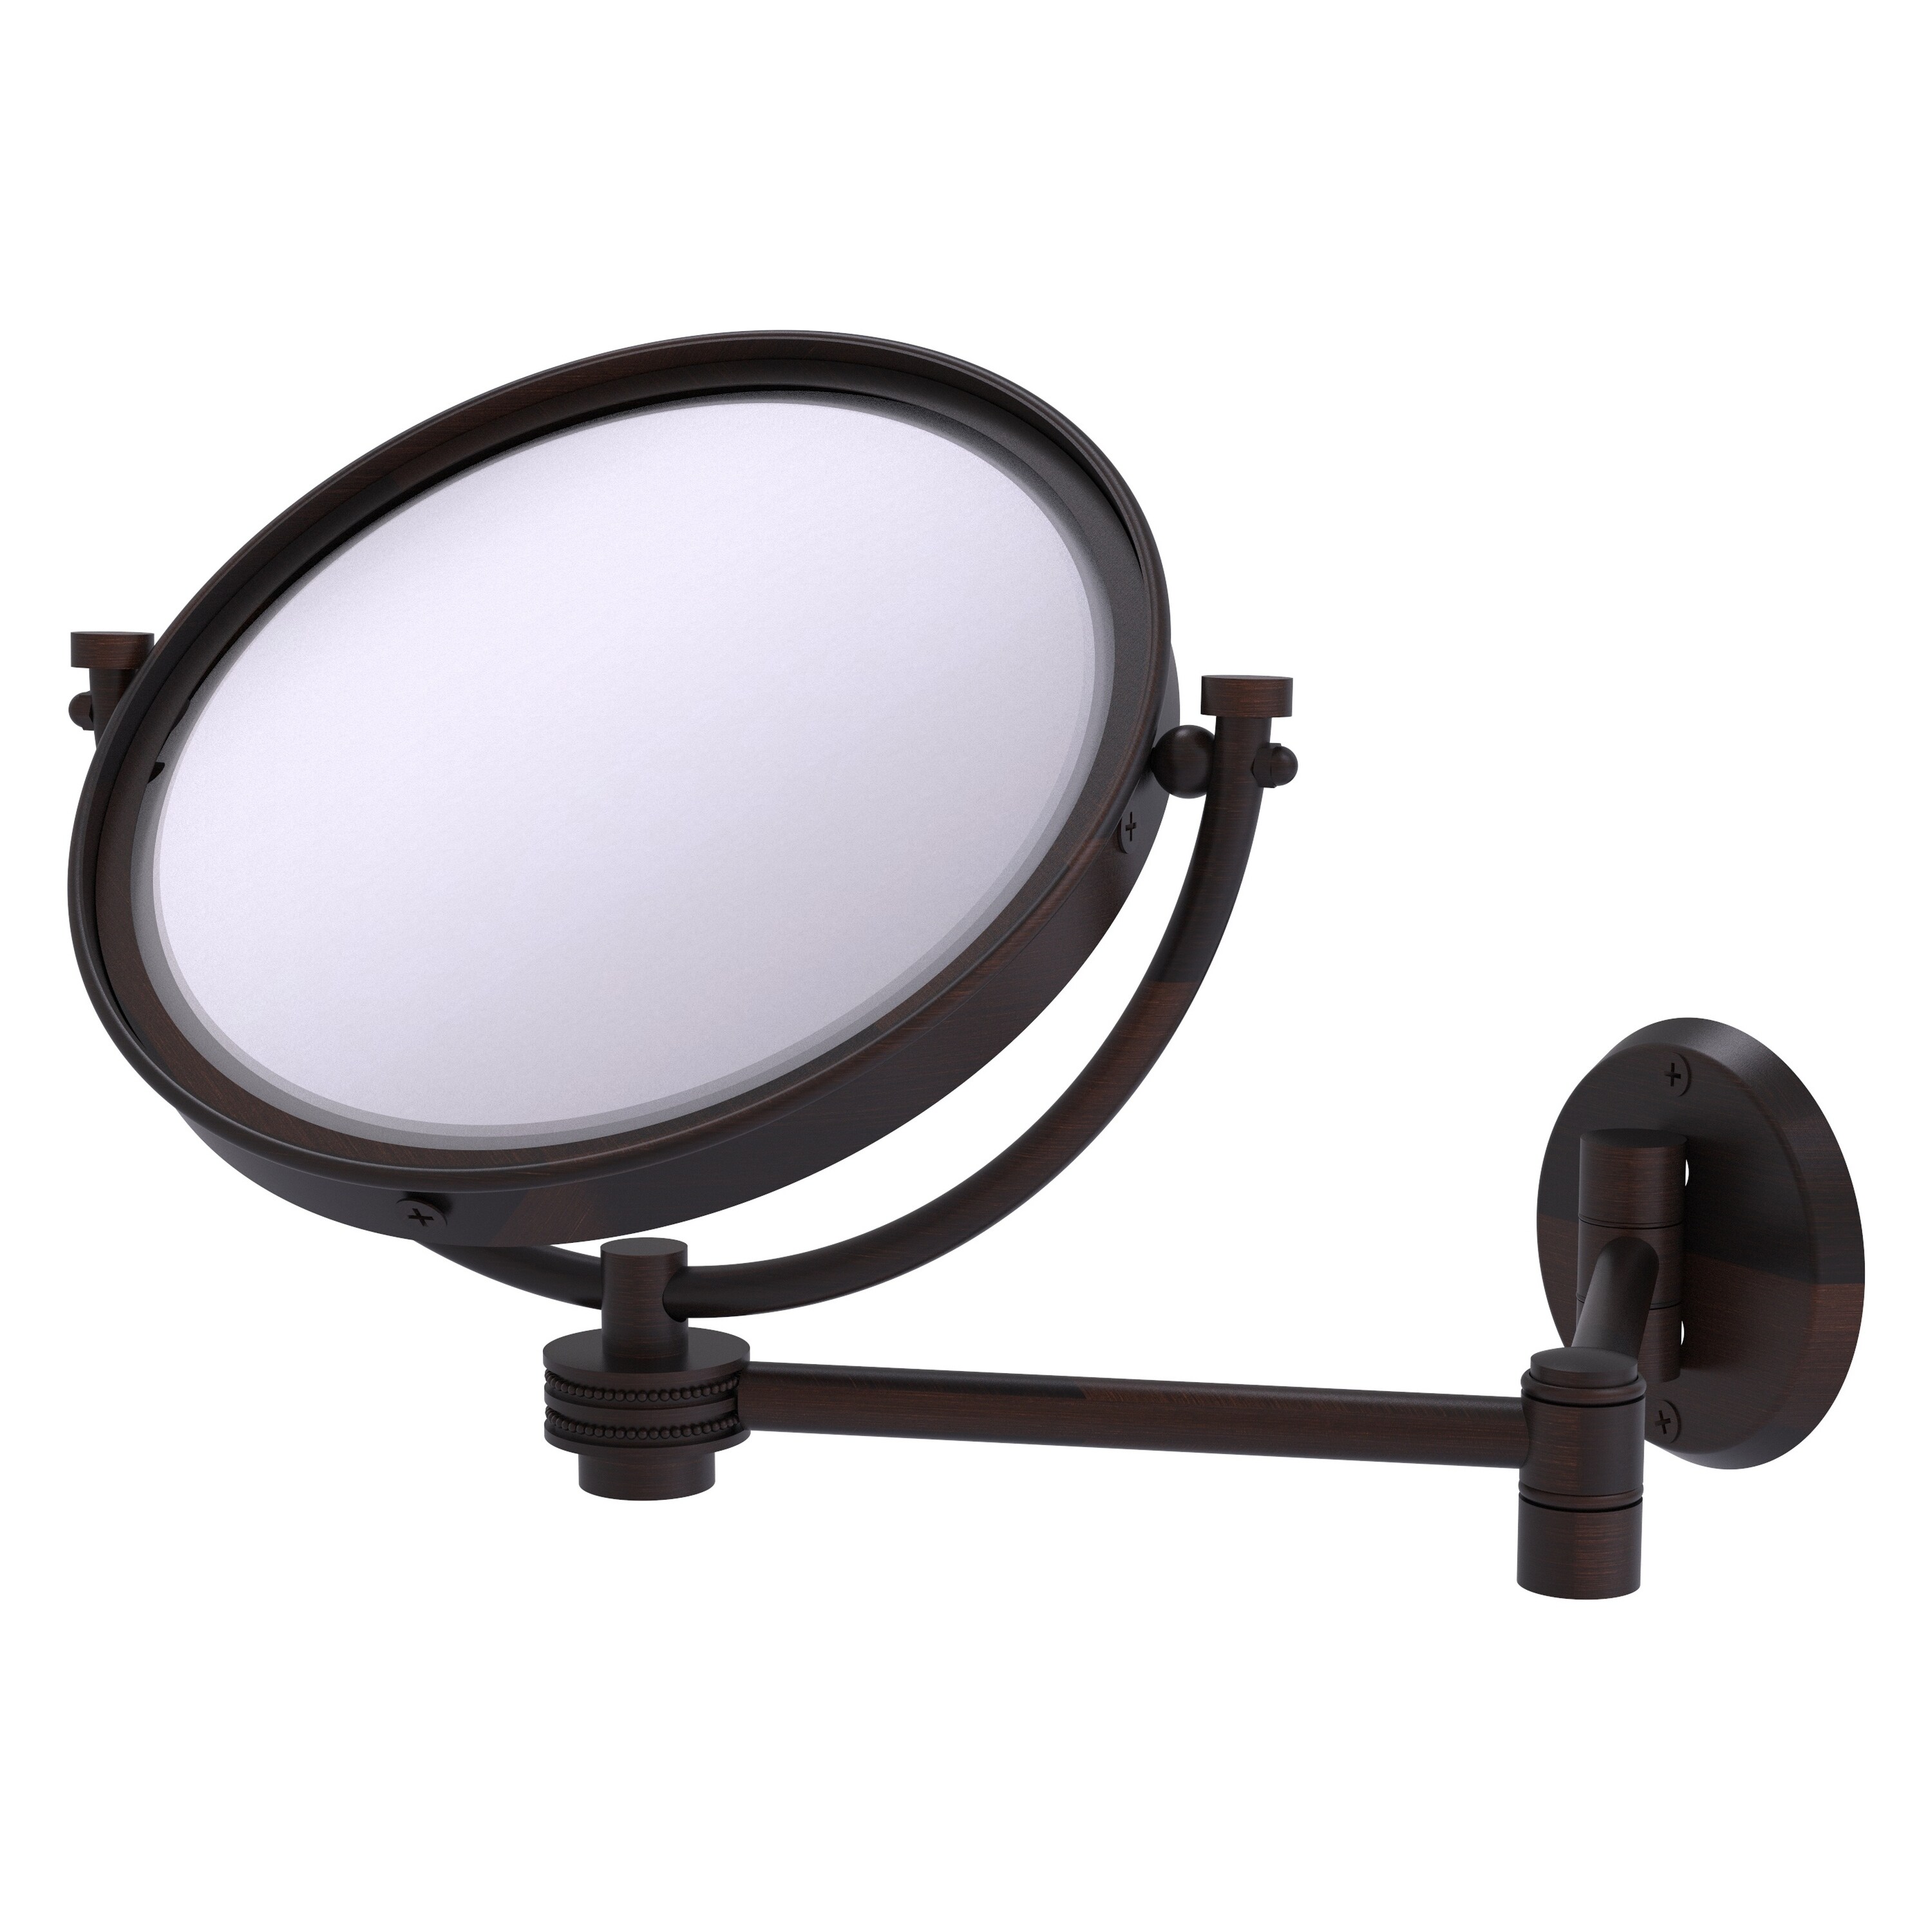 8-in x 10-in Distressed White Double-sided 5X Magnifying Wall-mounted Vanity Mirror | - Allied Brass WM-6D/4X-VB